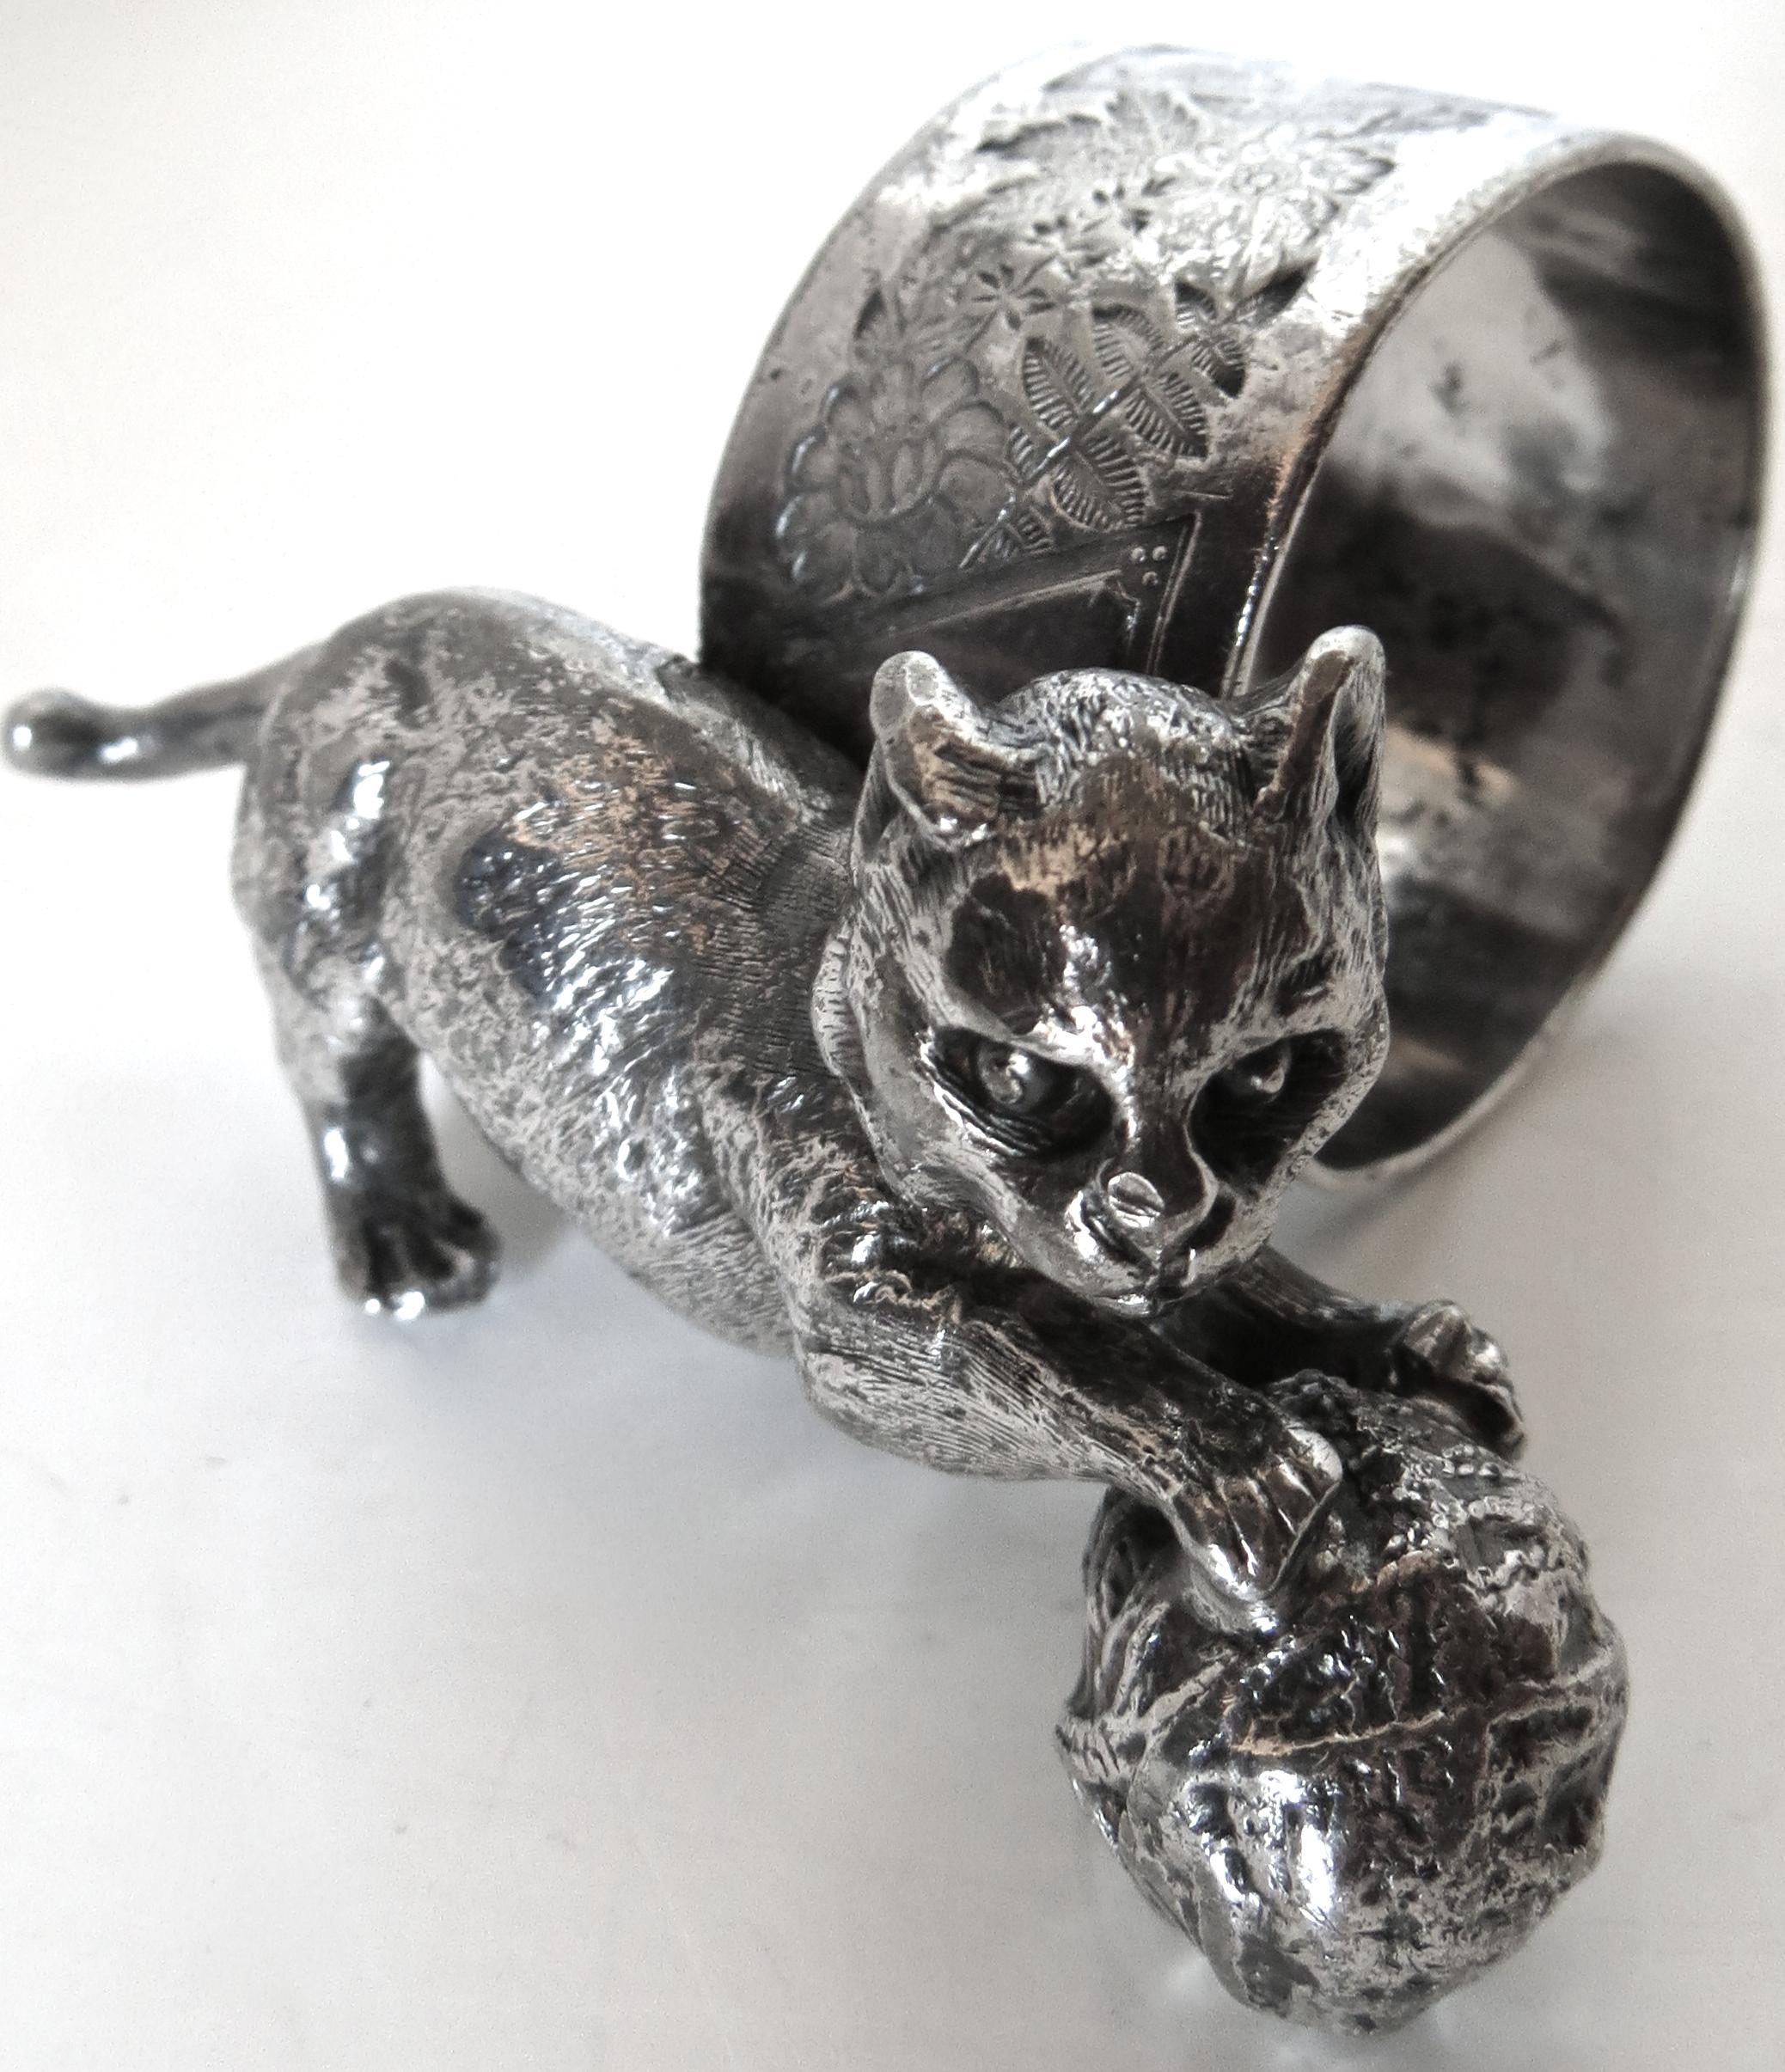 Animal themed Victorian napkin rings are sought after by collectors, perhaps because they remind them of pets they have; this particular ring depicts a cat whimsically playing with a ball of yarn, thus the name 